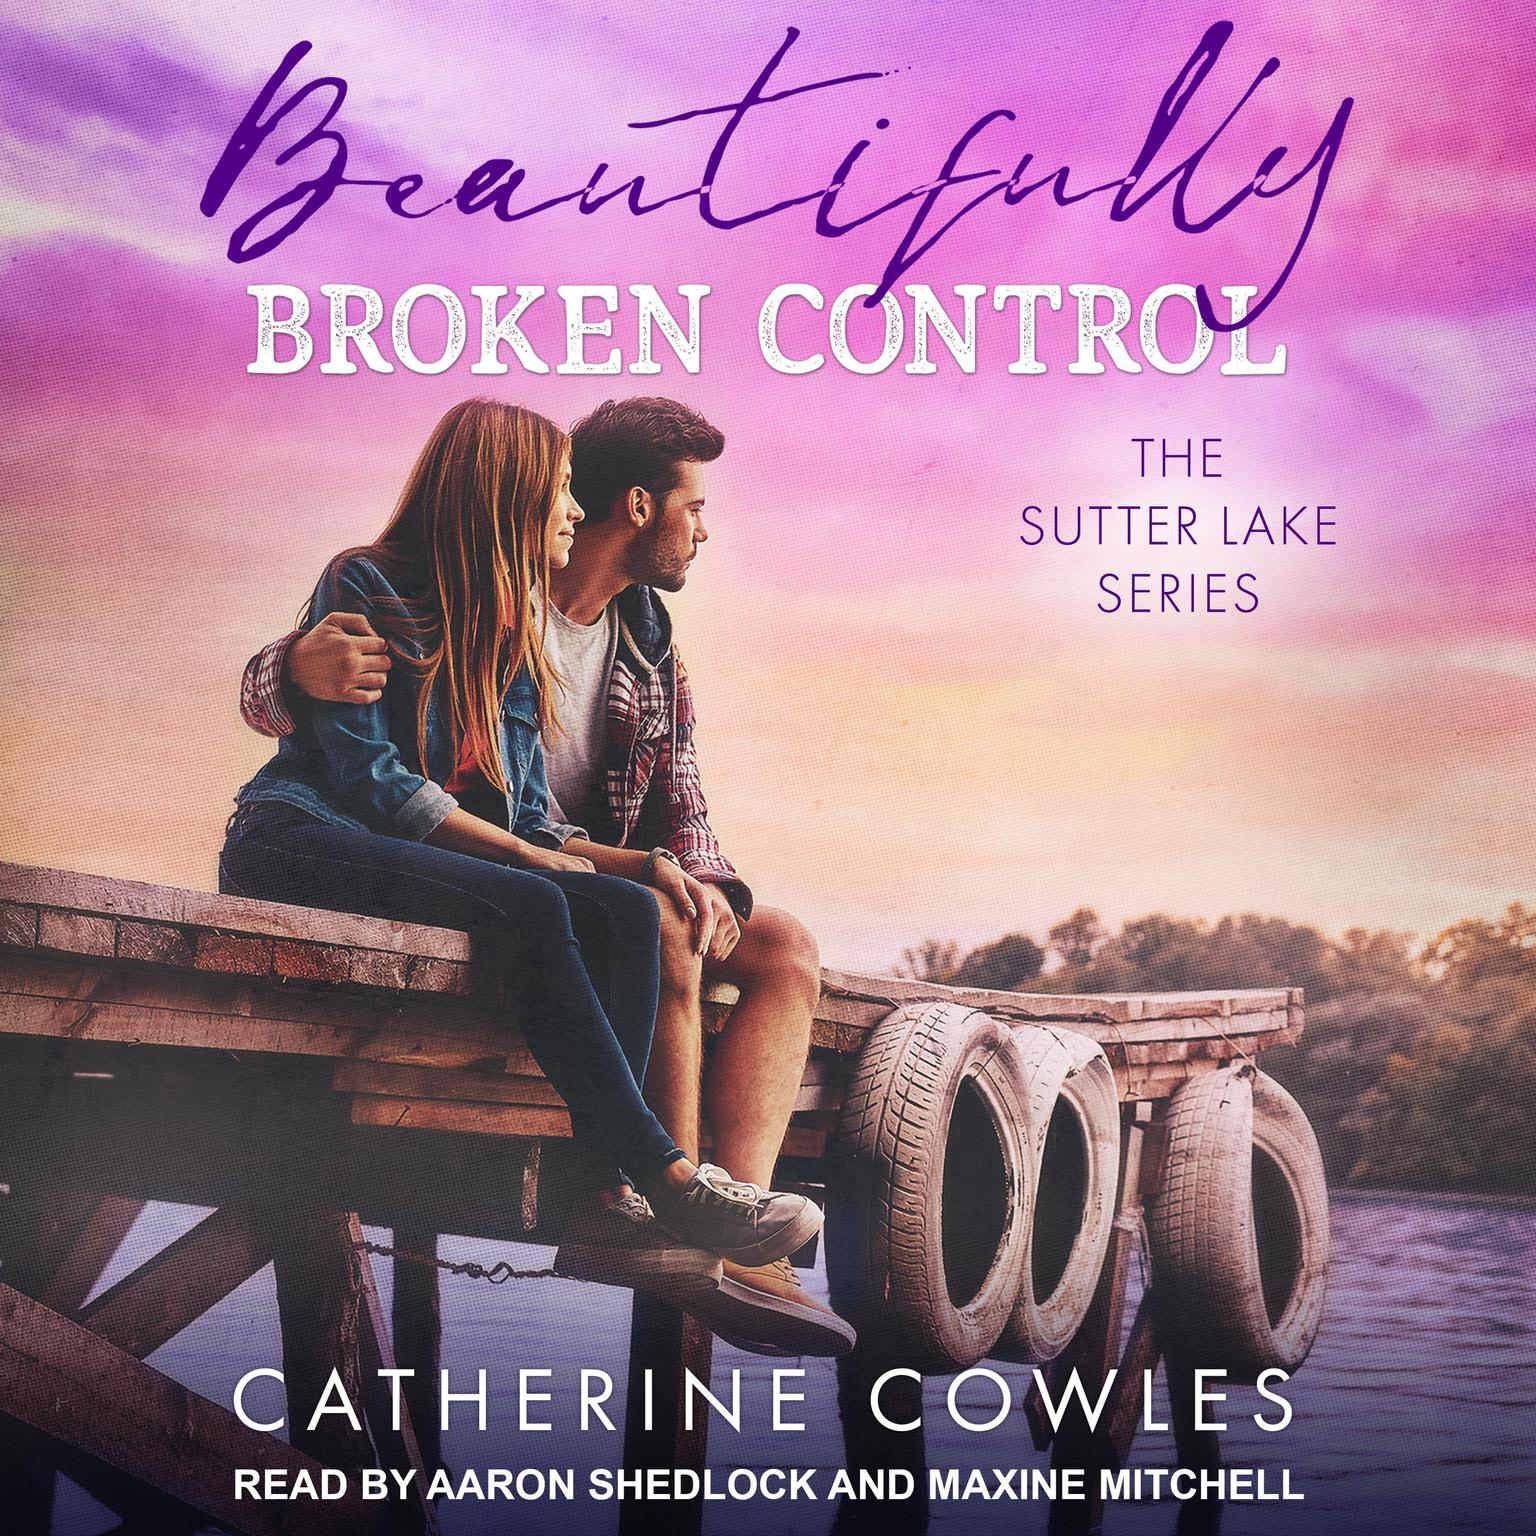 Beautifully Broken Control Audiobook, by Catherine Cowles